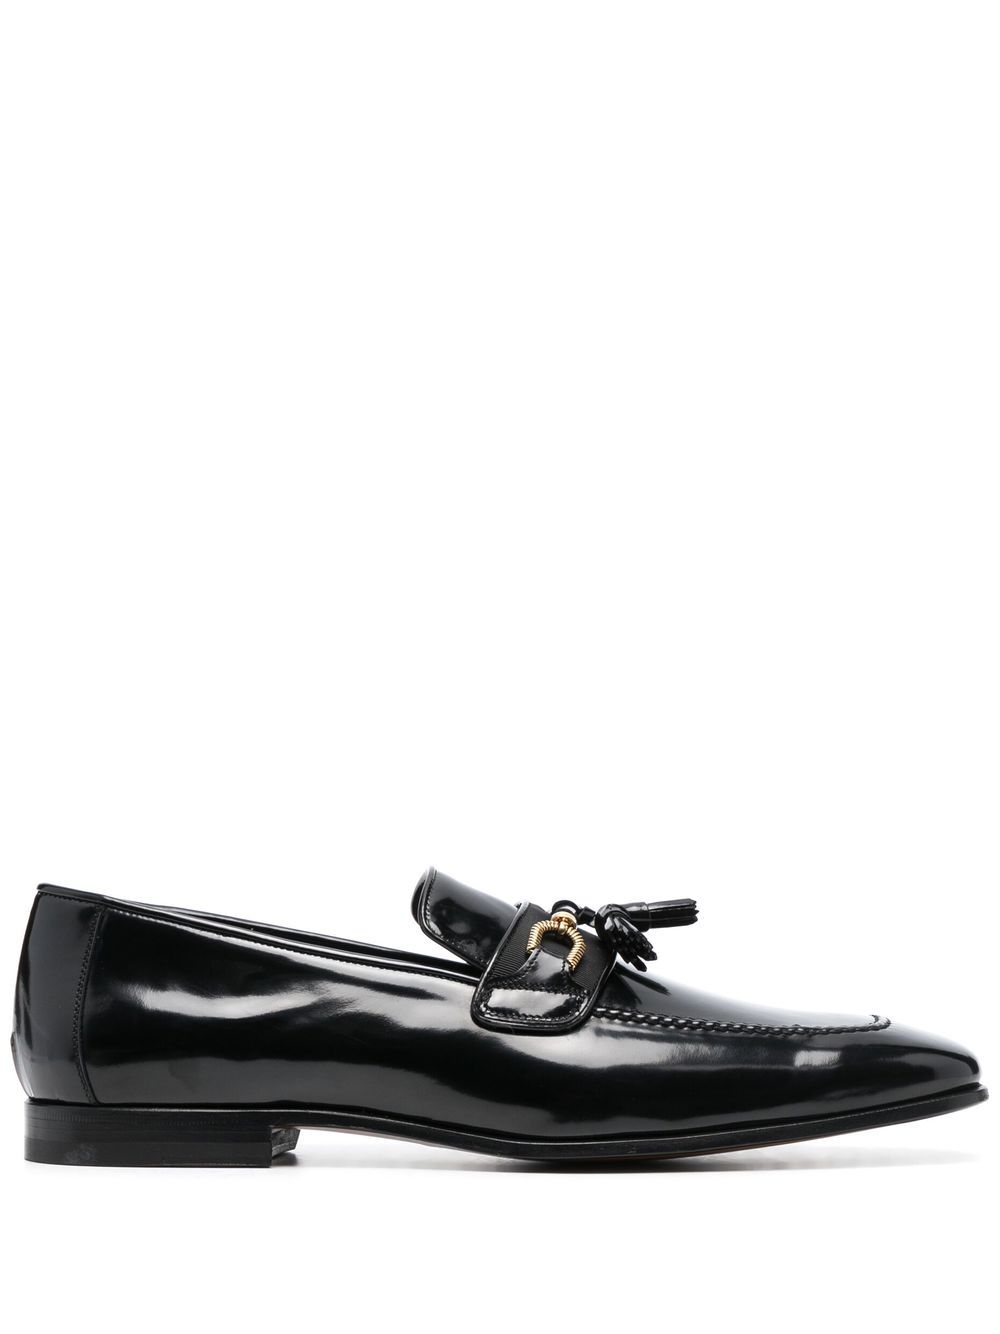 TOM FORD HORSEBIT-DETAIL LEATHER LOAFERS